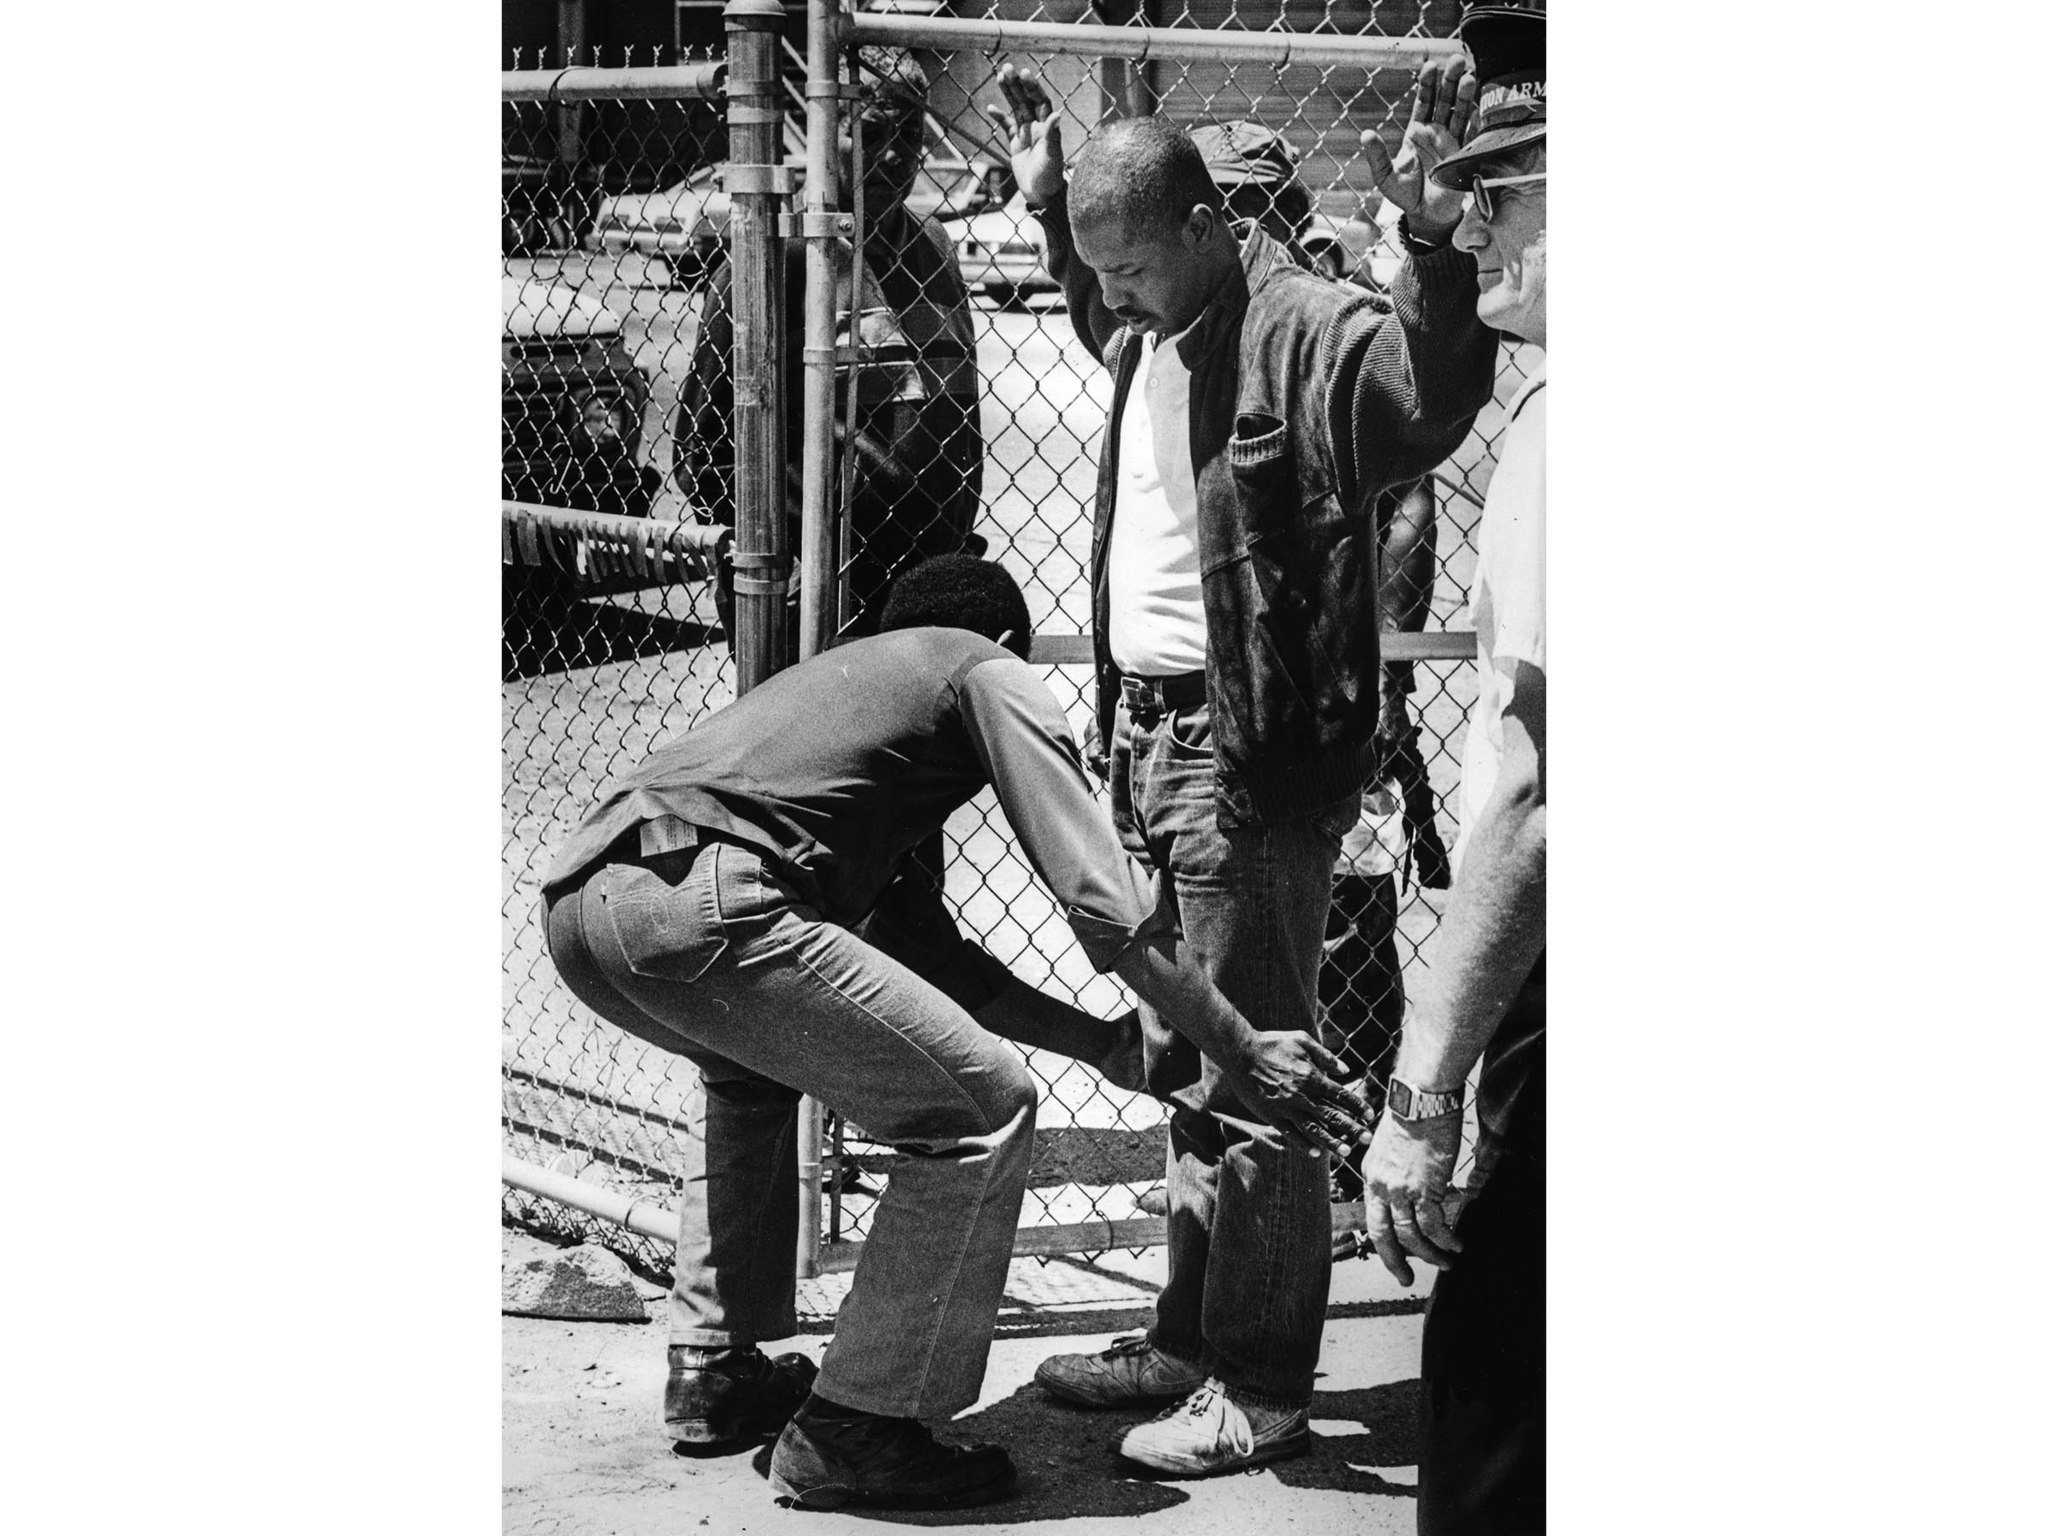 June 15, 1987: A man is searched for concealed weapons and contraban at entrance of the Urban Campgr